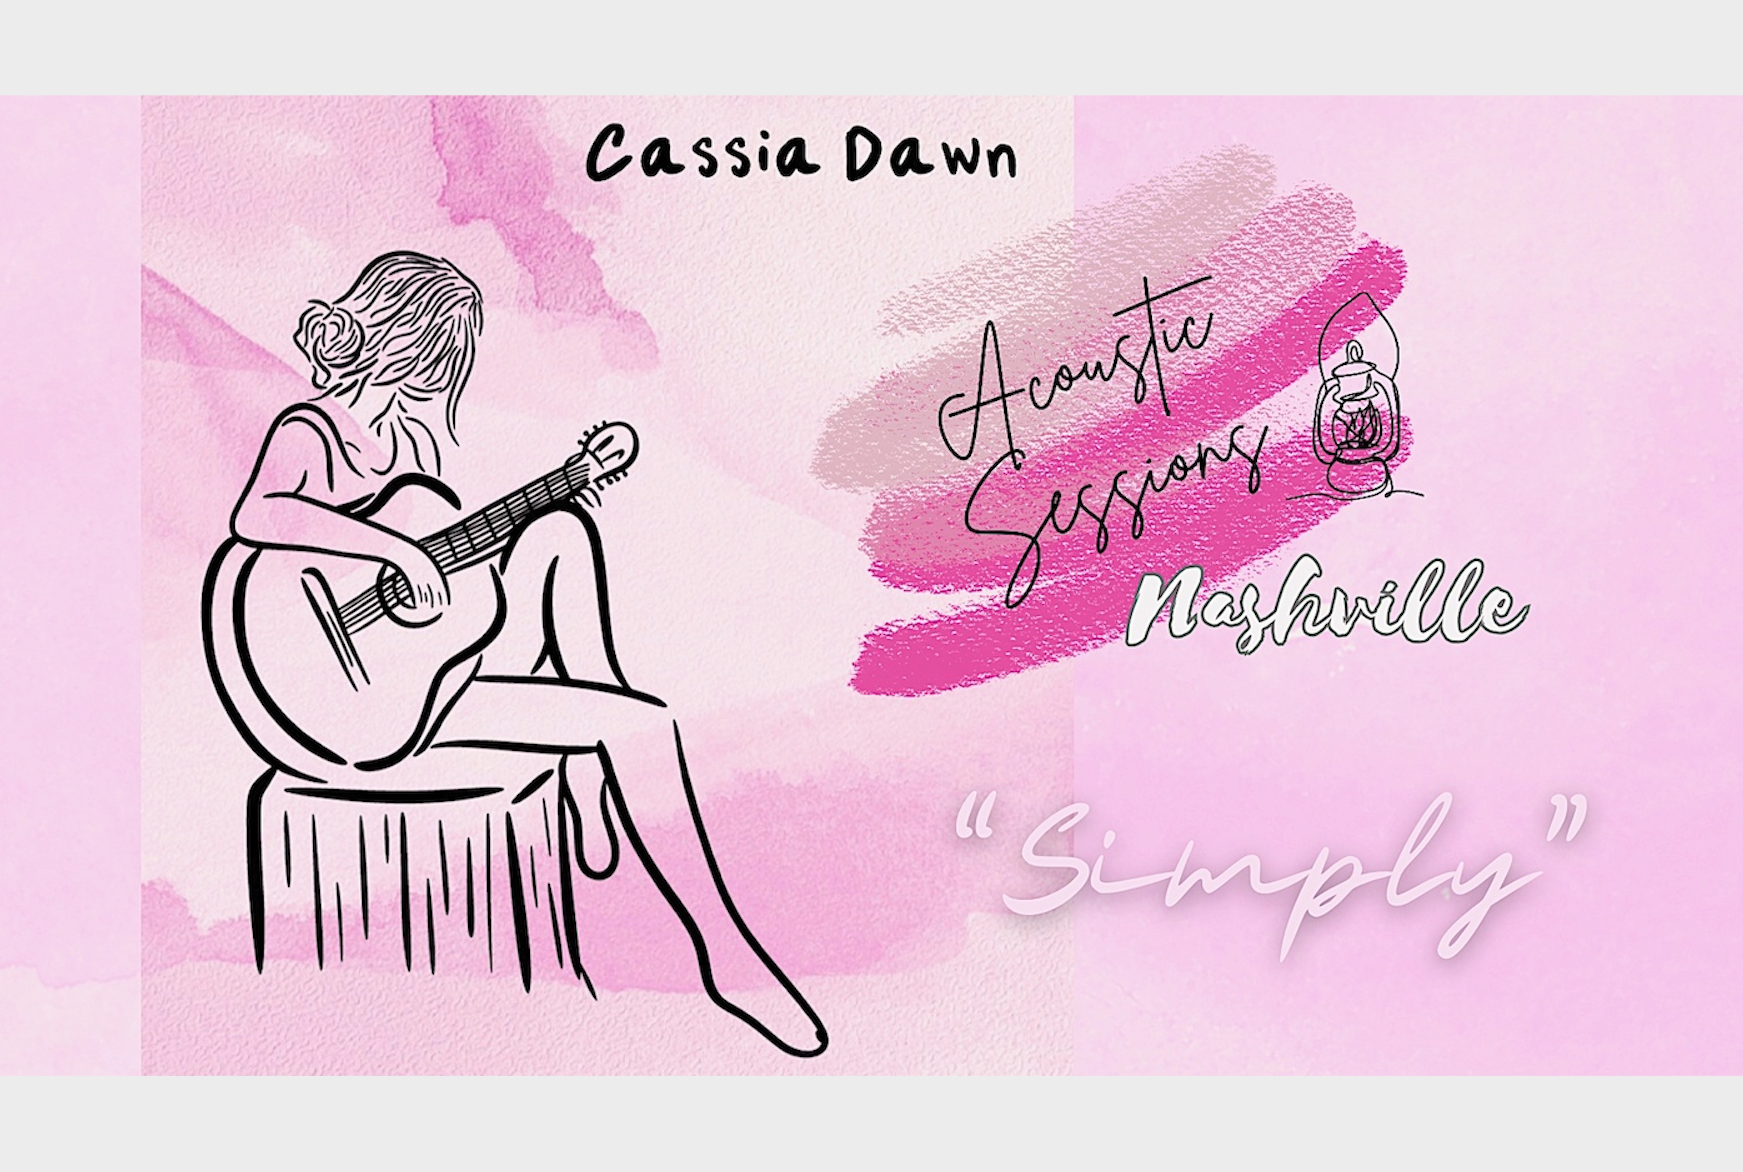 Cassia Dawn, singer-songwriter, nashville, new single, acoustic, acoustic sessions, acoustic release, new release, new video, new acoustic song, acoustic musicians, Simply song, Simply by cassia dawn, music, musician, artist, singer, songwriter, vocalist